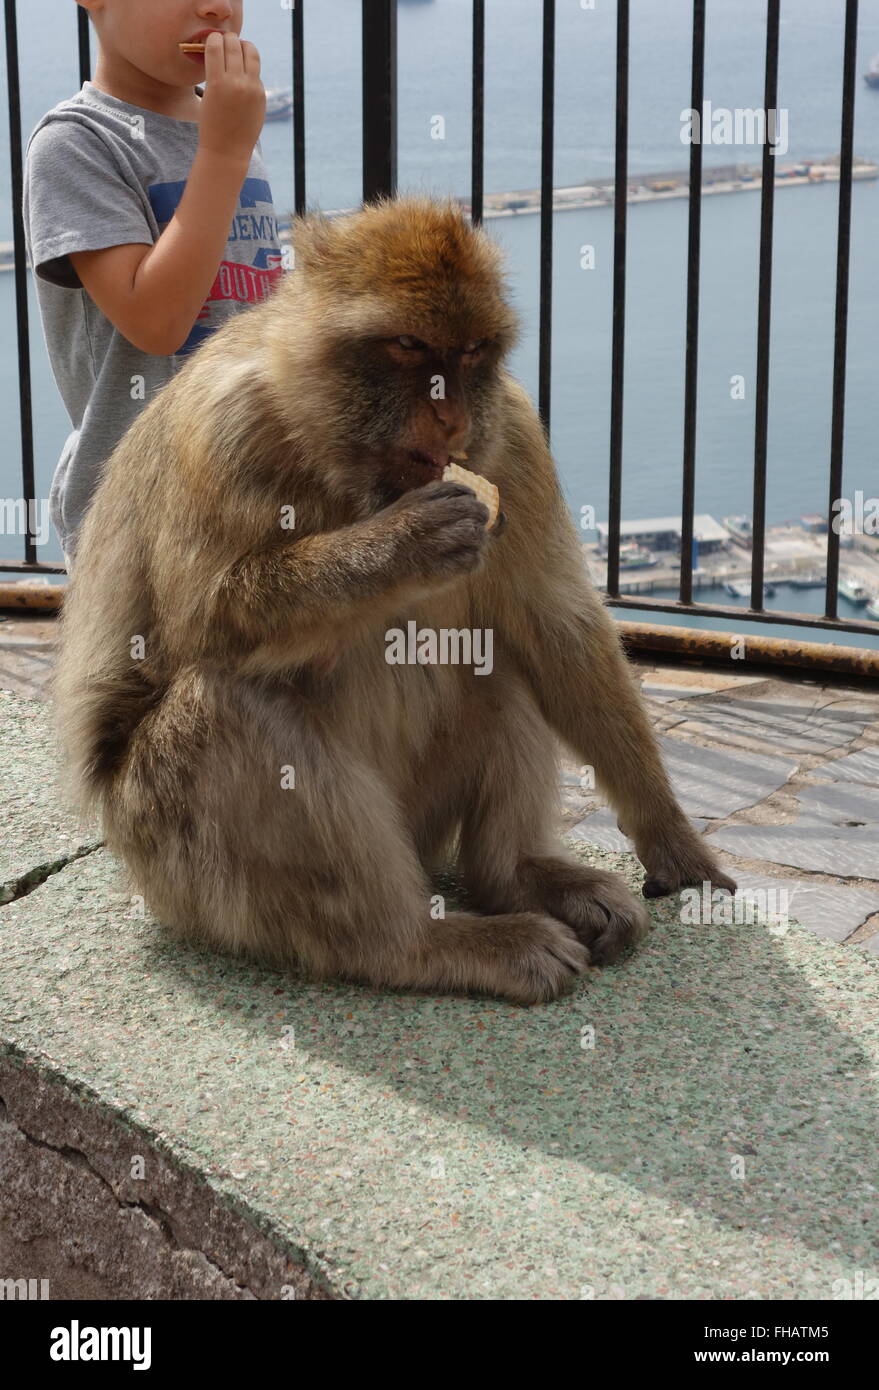 Barbary macaques in Gibraltar Stockfoto